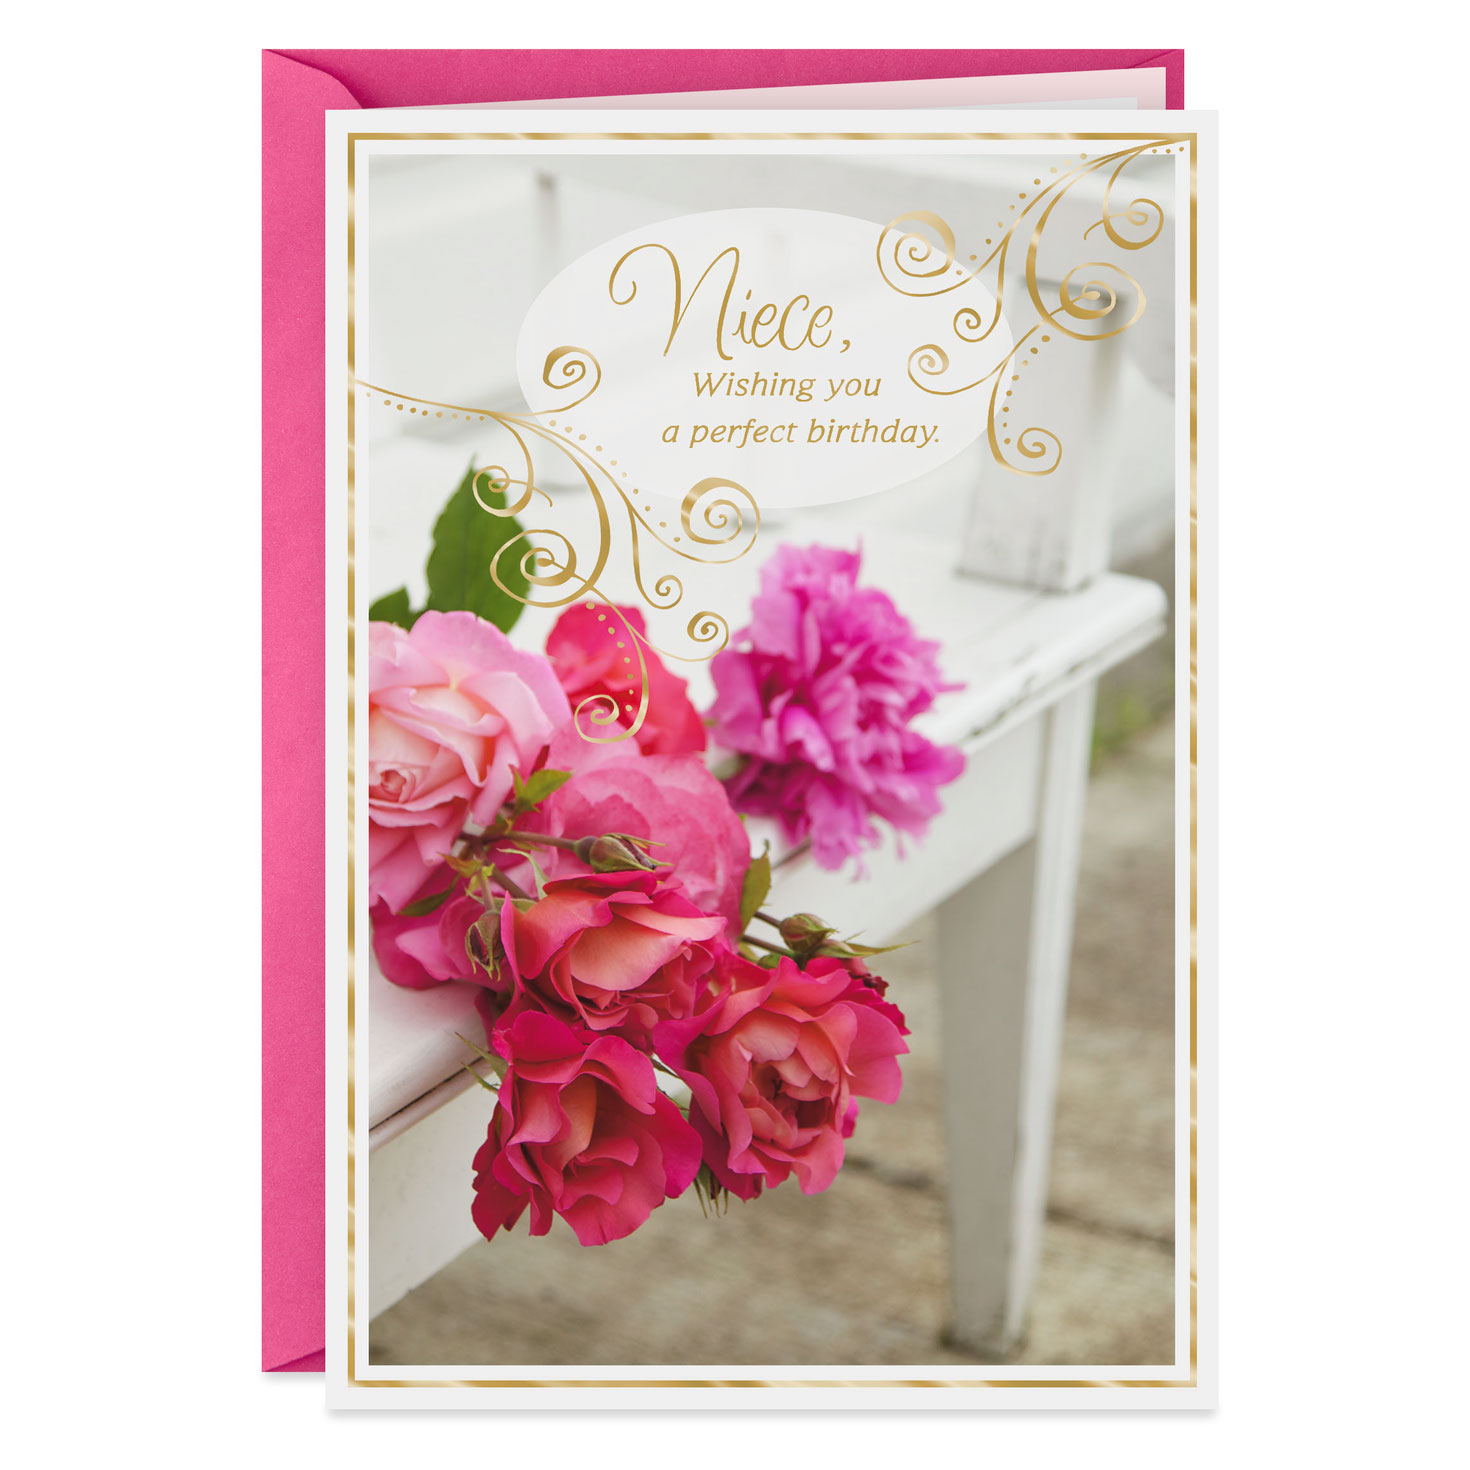 age pink Cute Niece Birthday Wishes Greetings Card new girl 